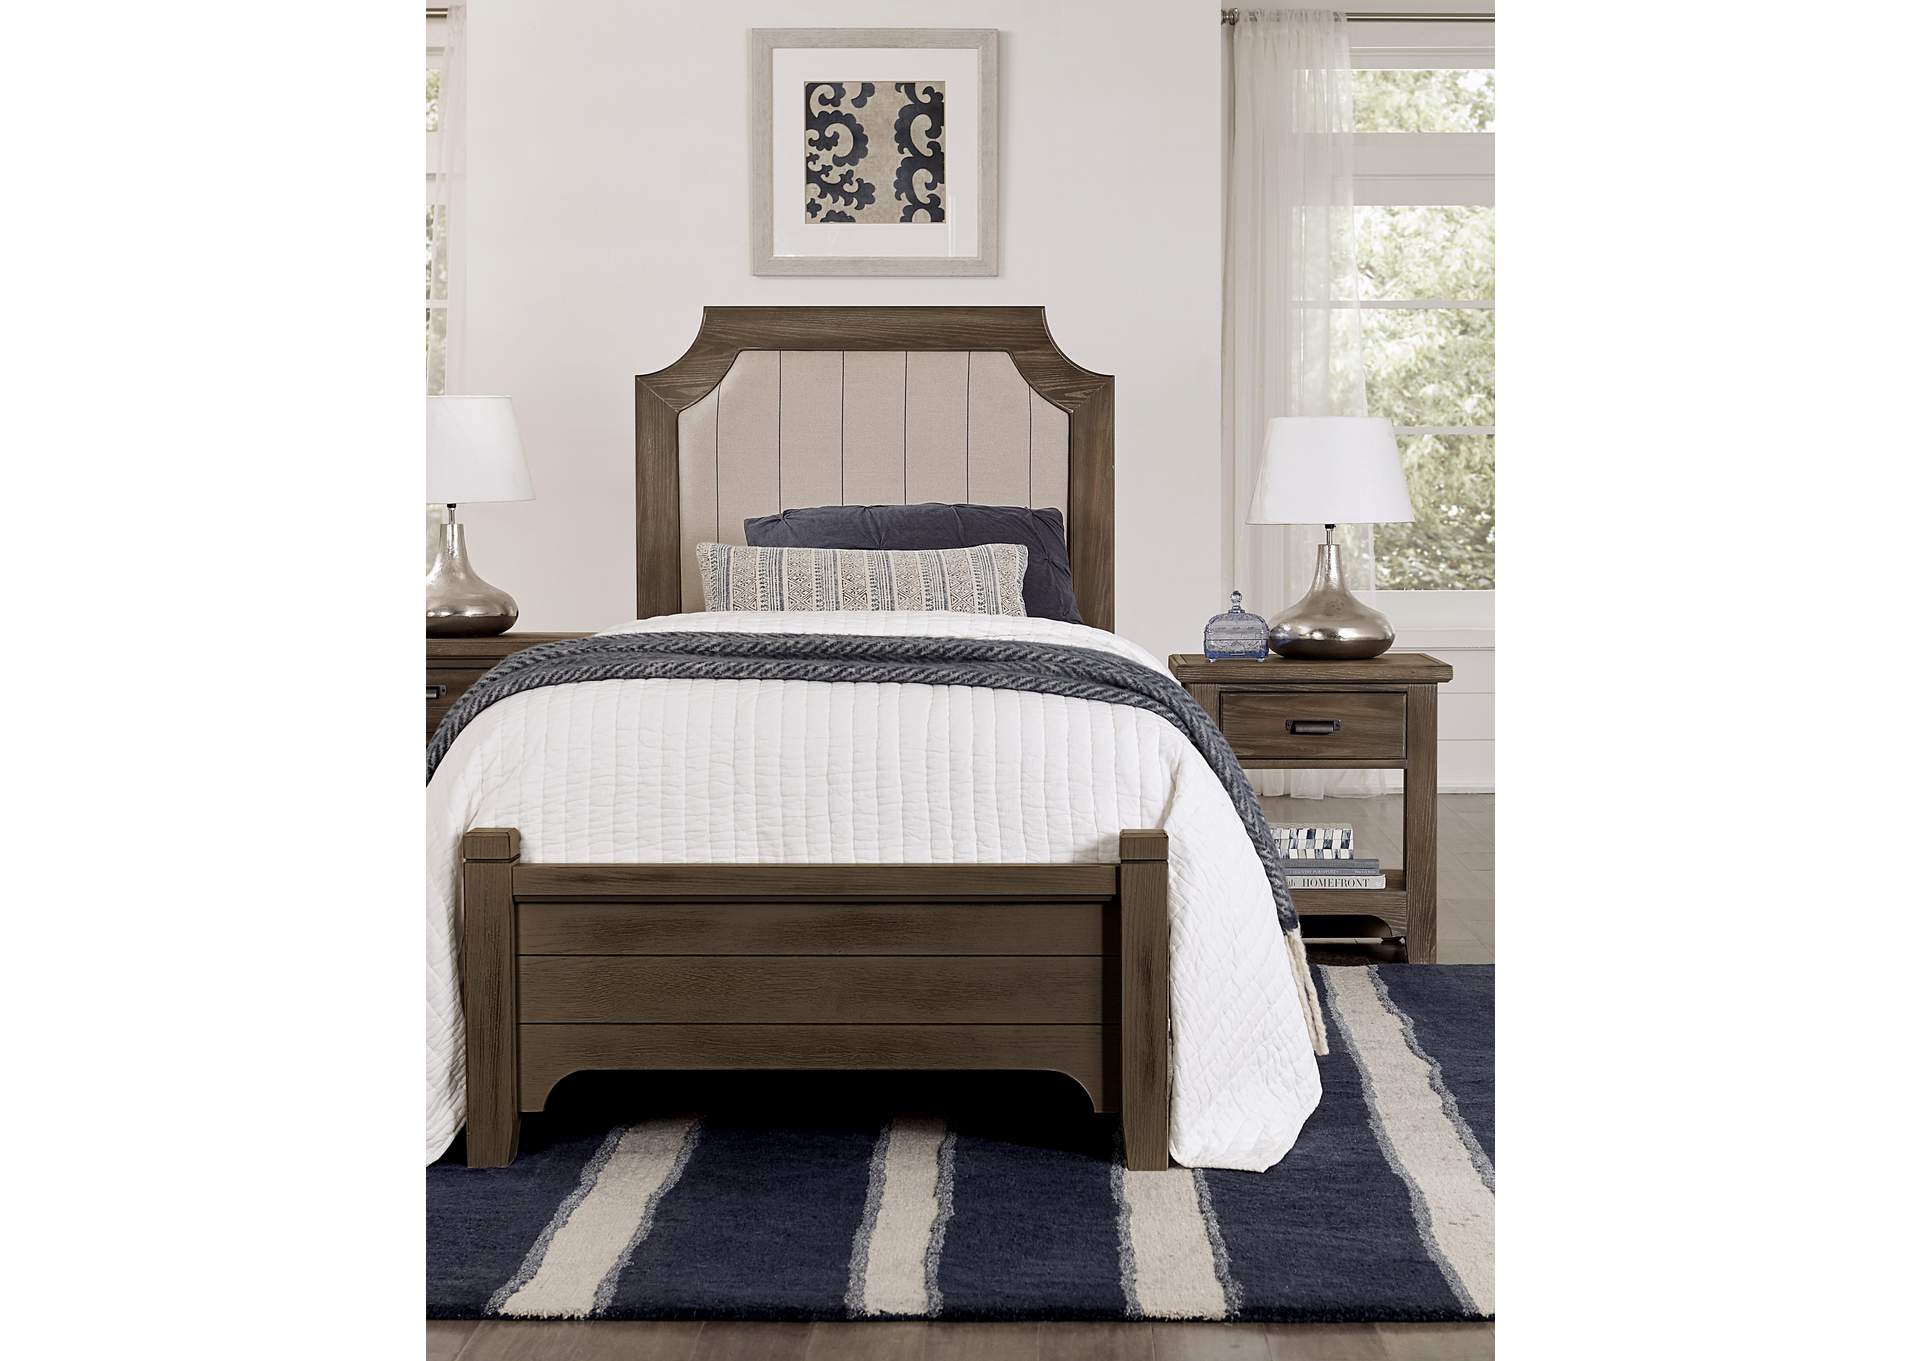 Bungalow Folkstone  Twin Upholstered Bed,Vaughan-Bassett